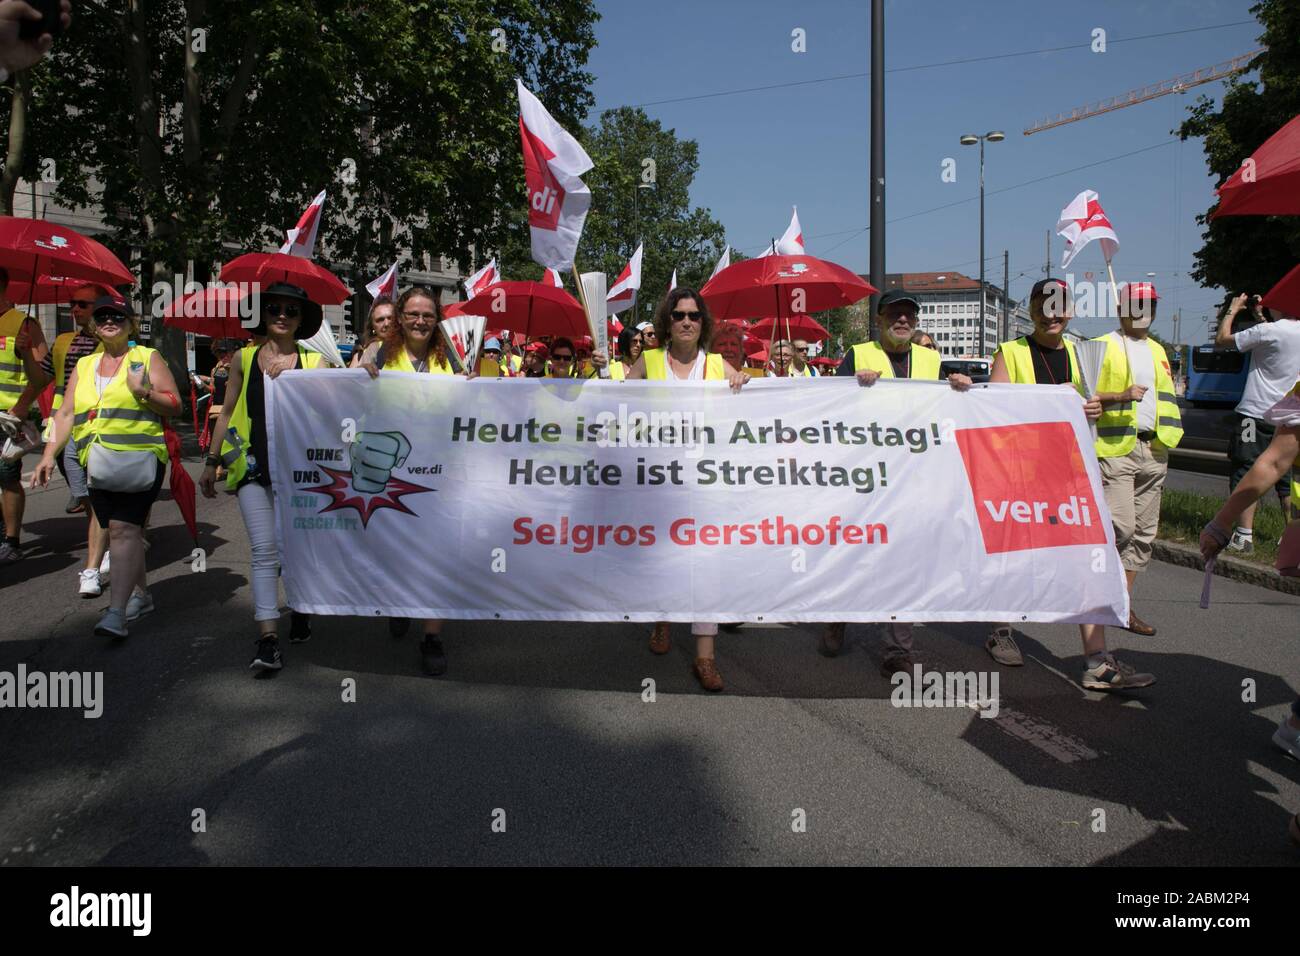 Around 1100 employees of trading companies from Bavaria lay down their work with a protest march from the union building on Schwanthalerstraße to Gärtnerplatz for higher salaries. The picture shows Selgros employees in Gersthofen. [automated translation] Stock Photo